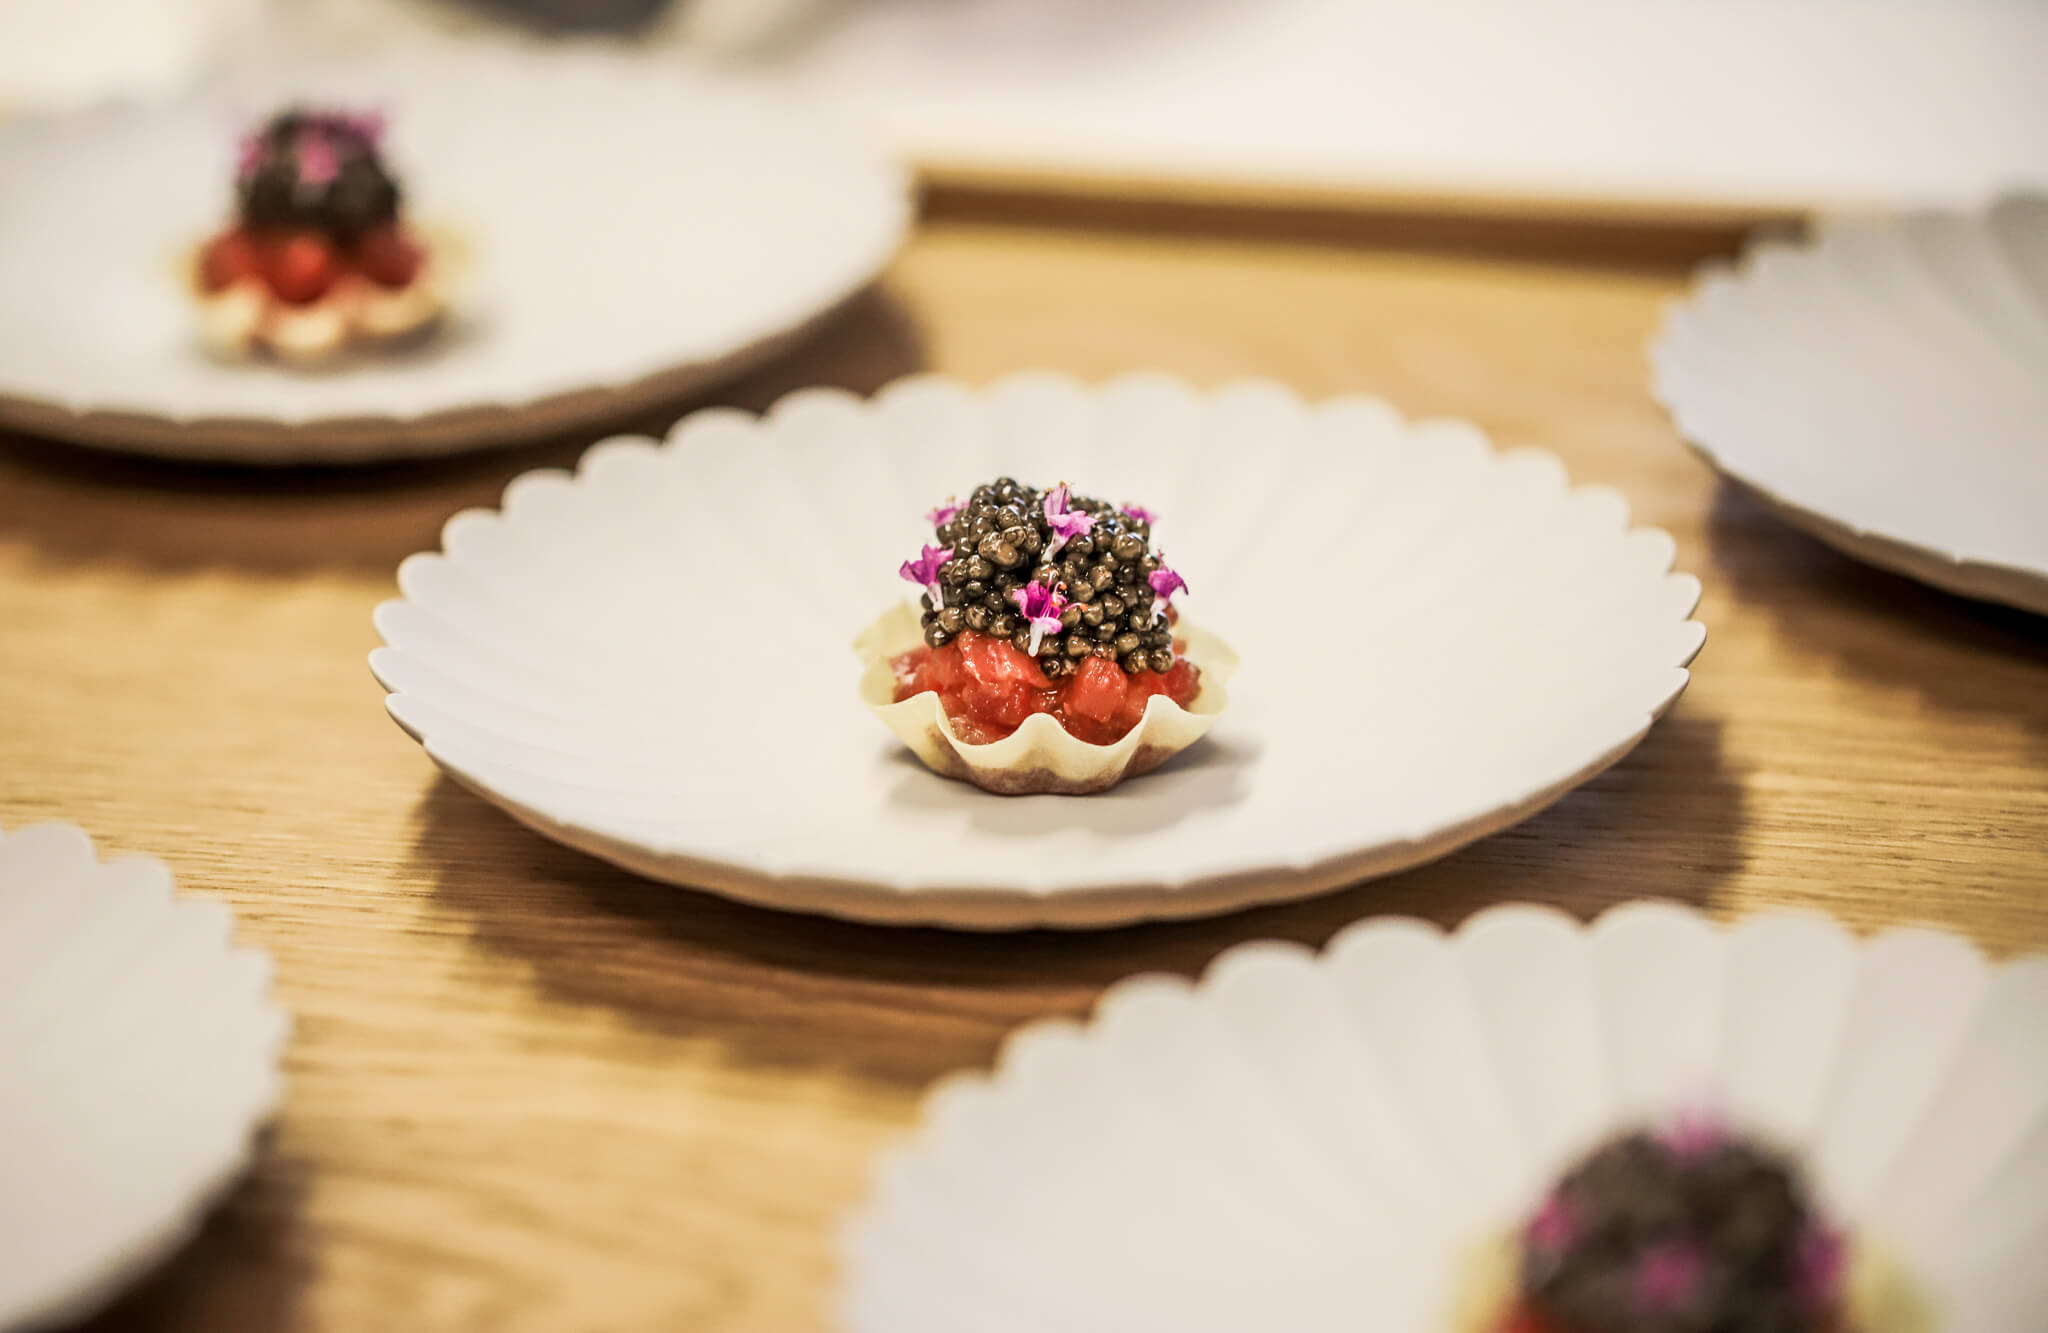 Dessert by Eric Vildgaard on his quest for perfection